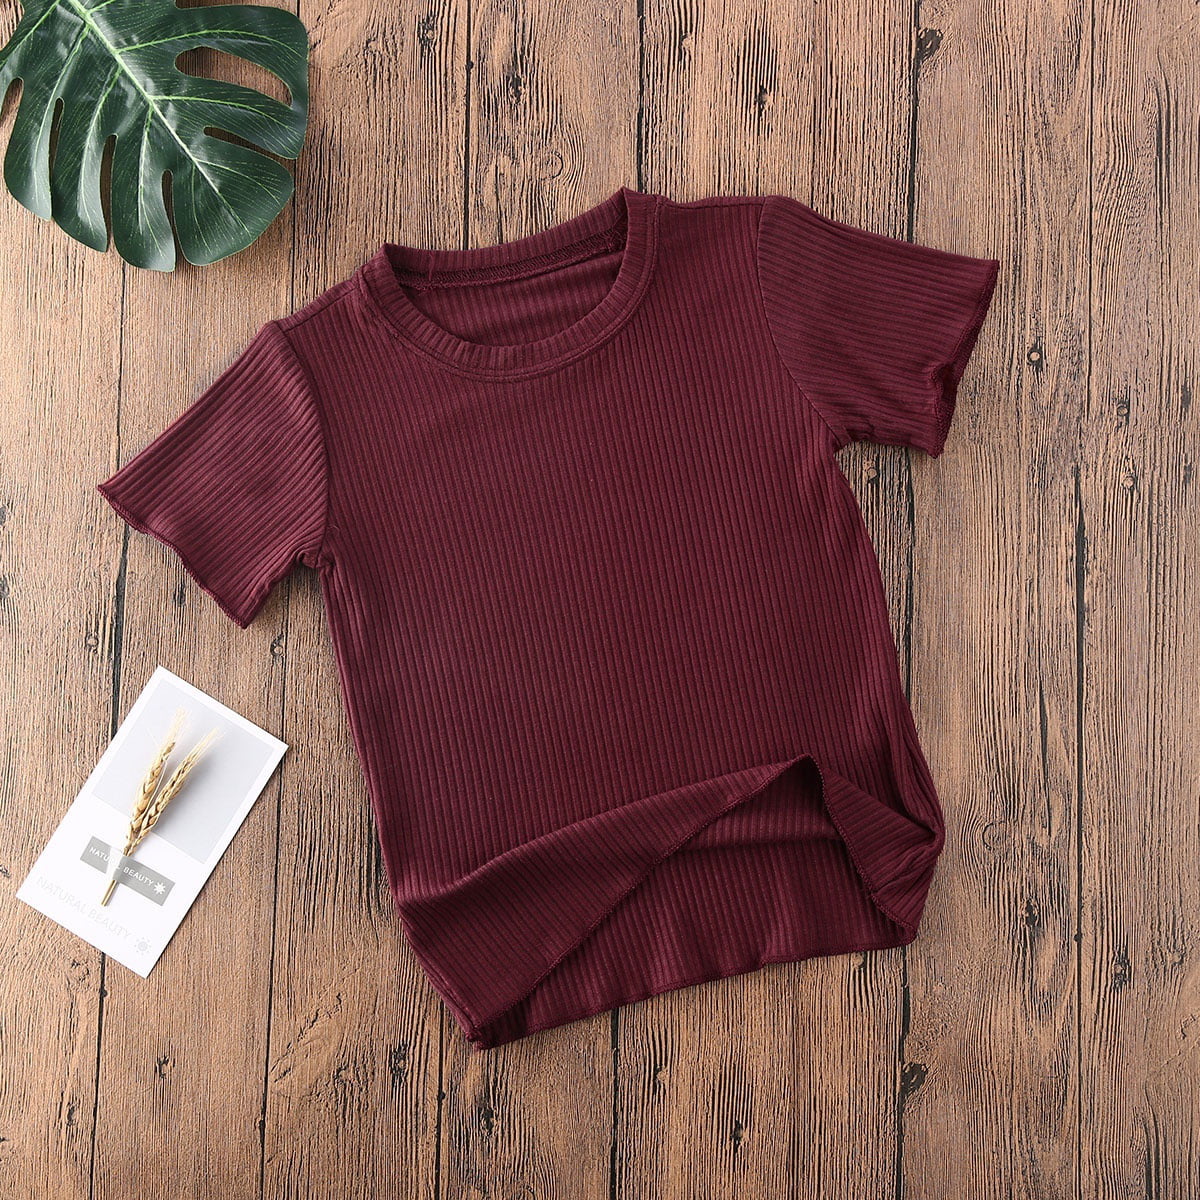 red t shirt for baby girl